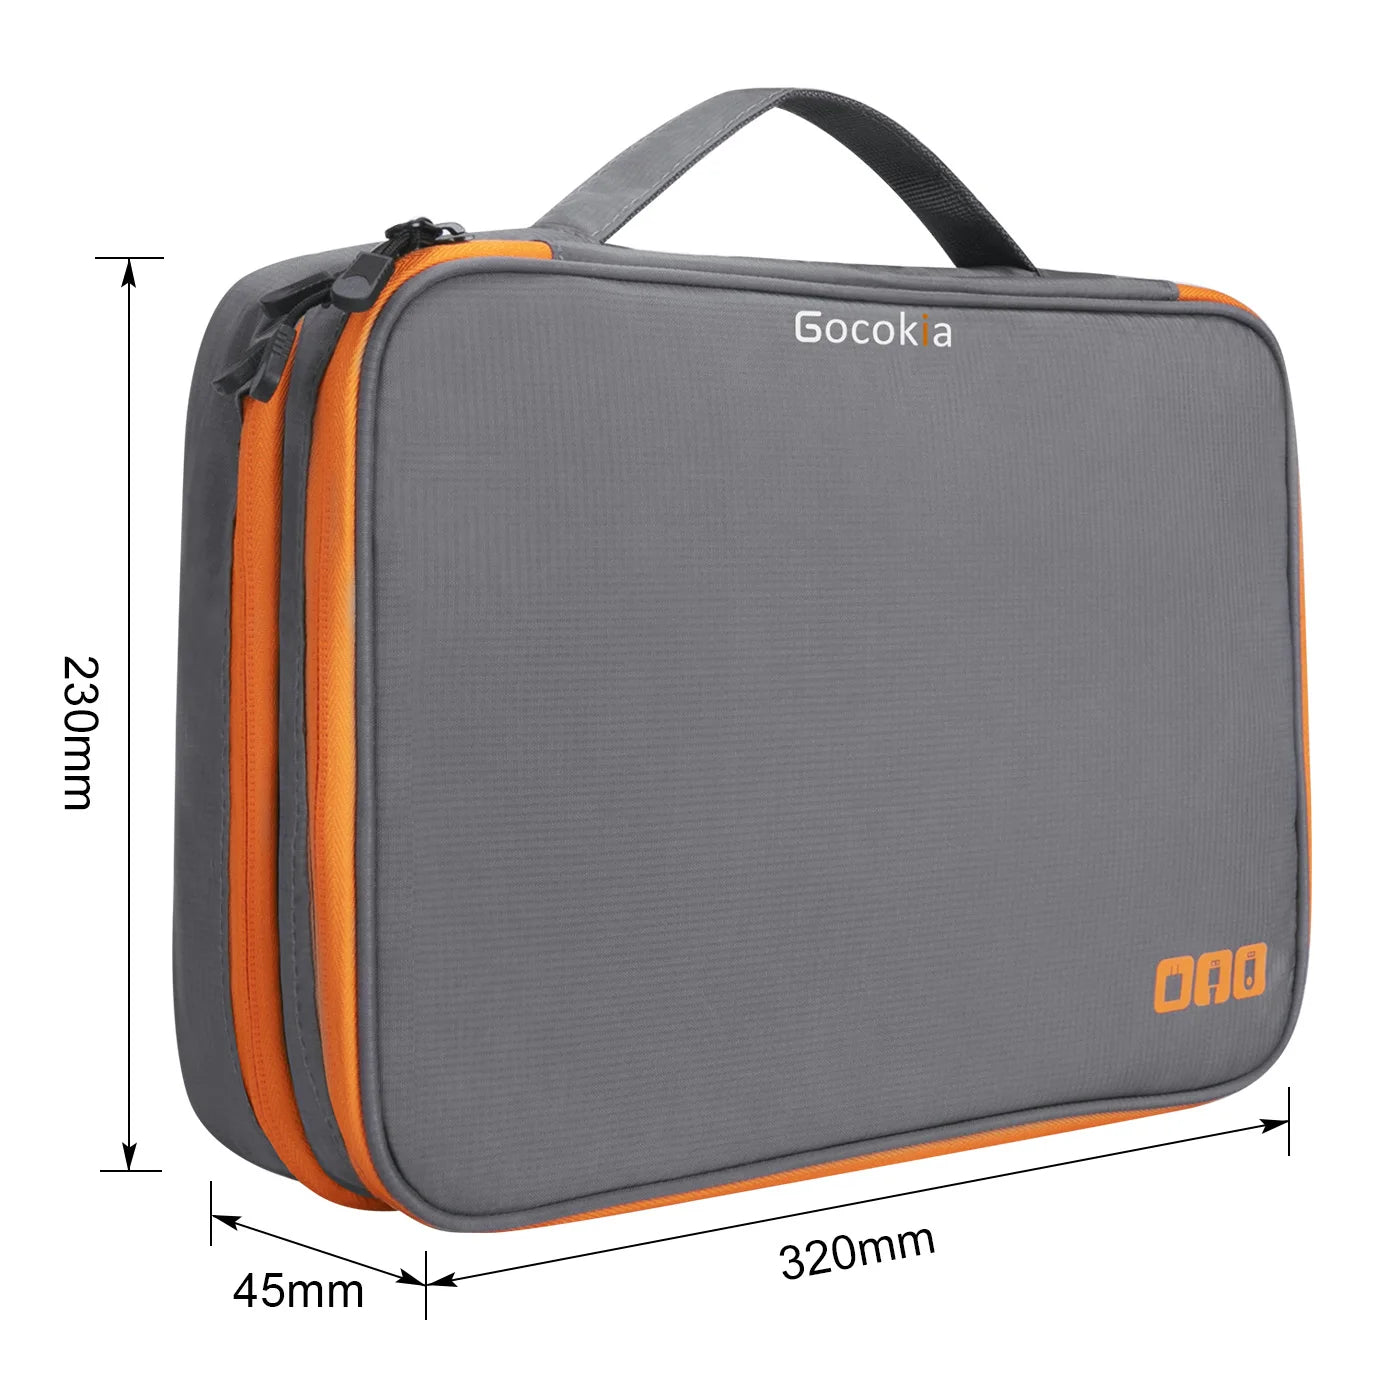 Portable Electronic Accessories Travel case,Cable Organizer Bag Gadget Carry Bag for iPad,Cables,Power,USB Flash Drive, Charger